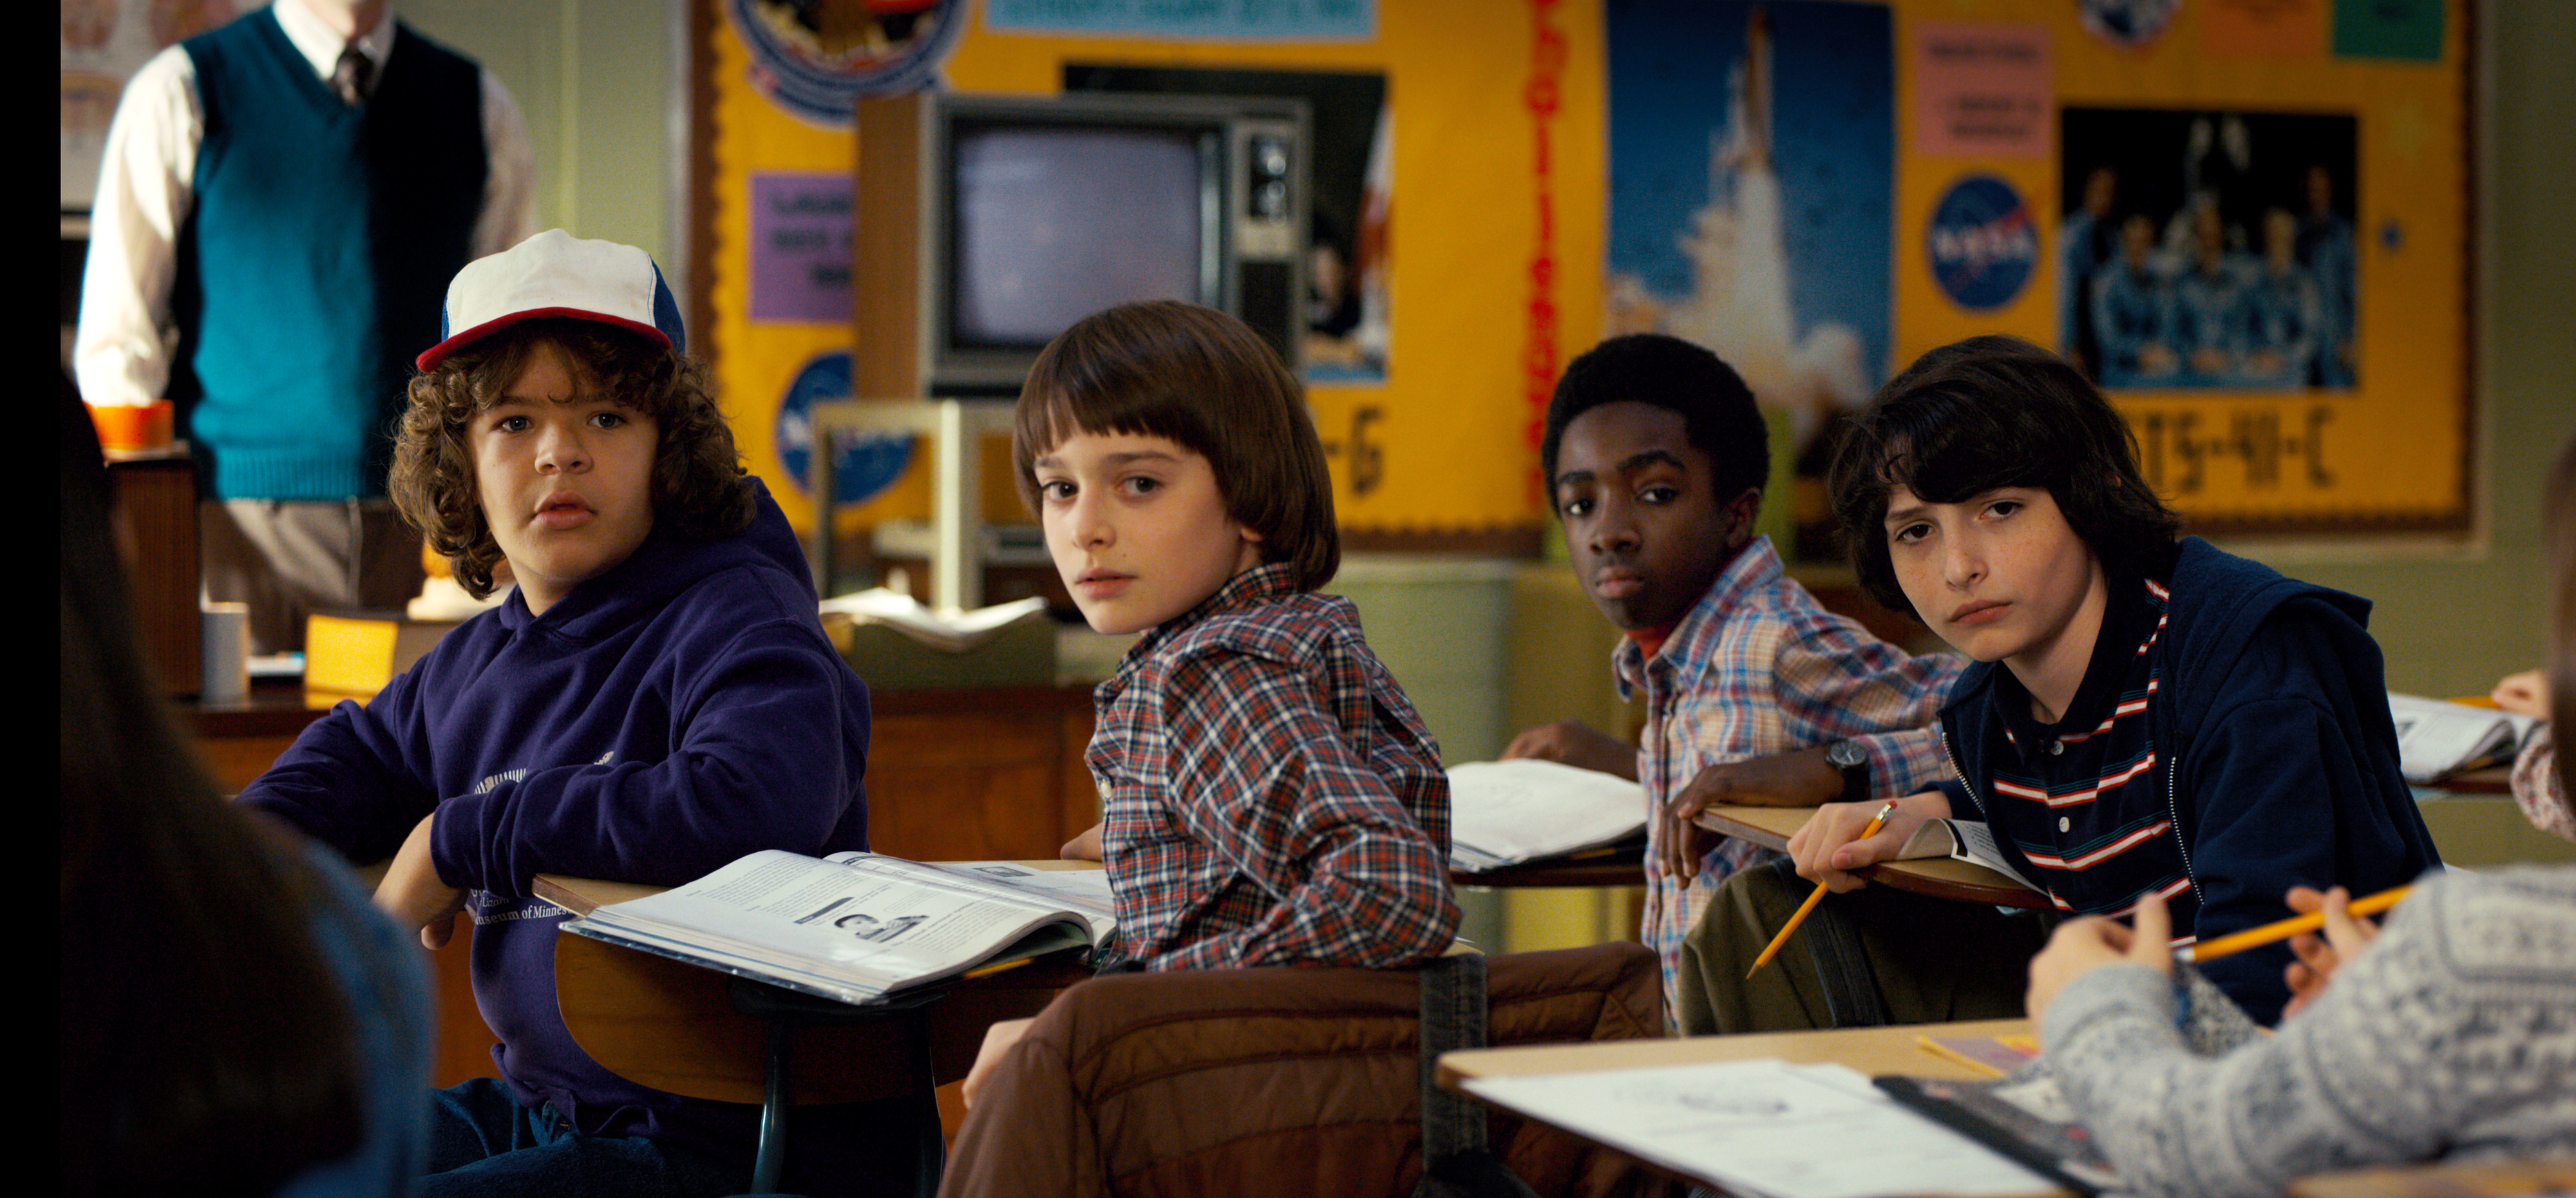 Dustin, Will, Lucas, and Mike from Stranger Things in a classroom scene